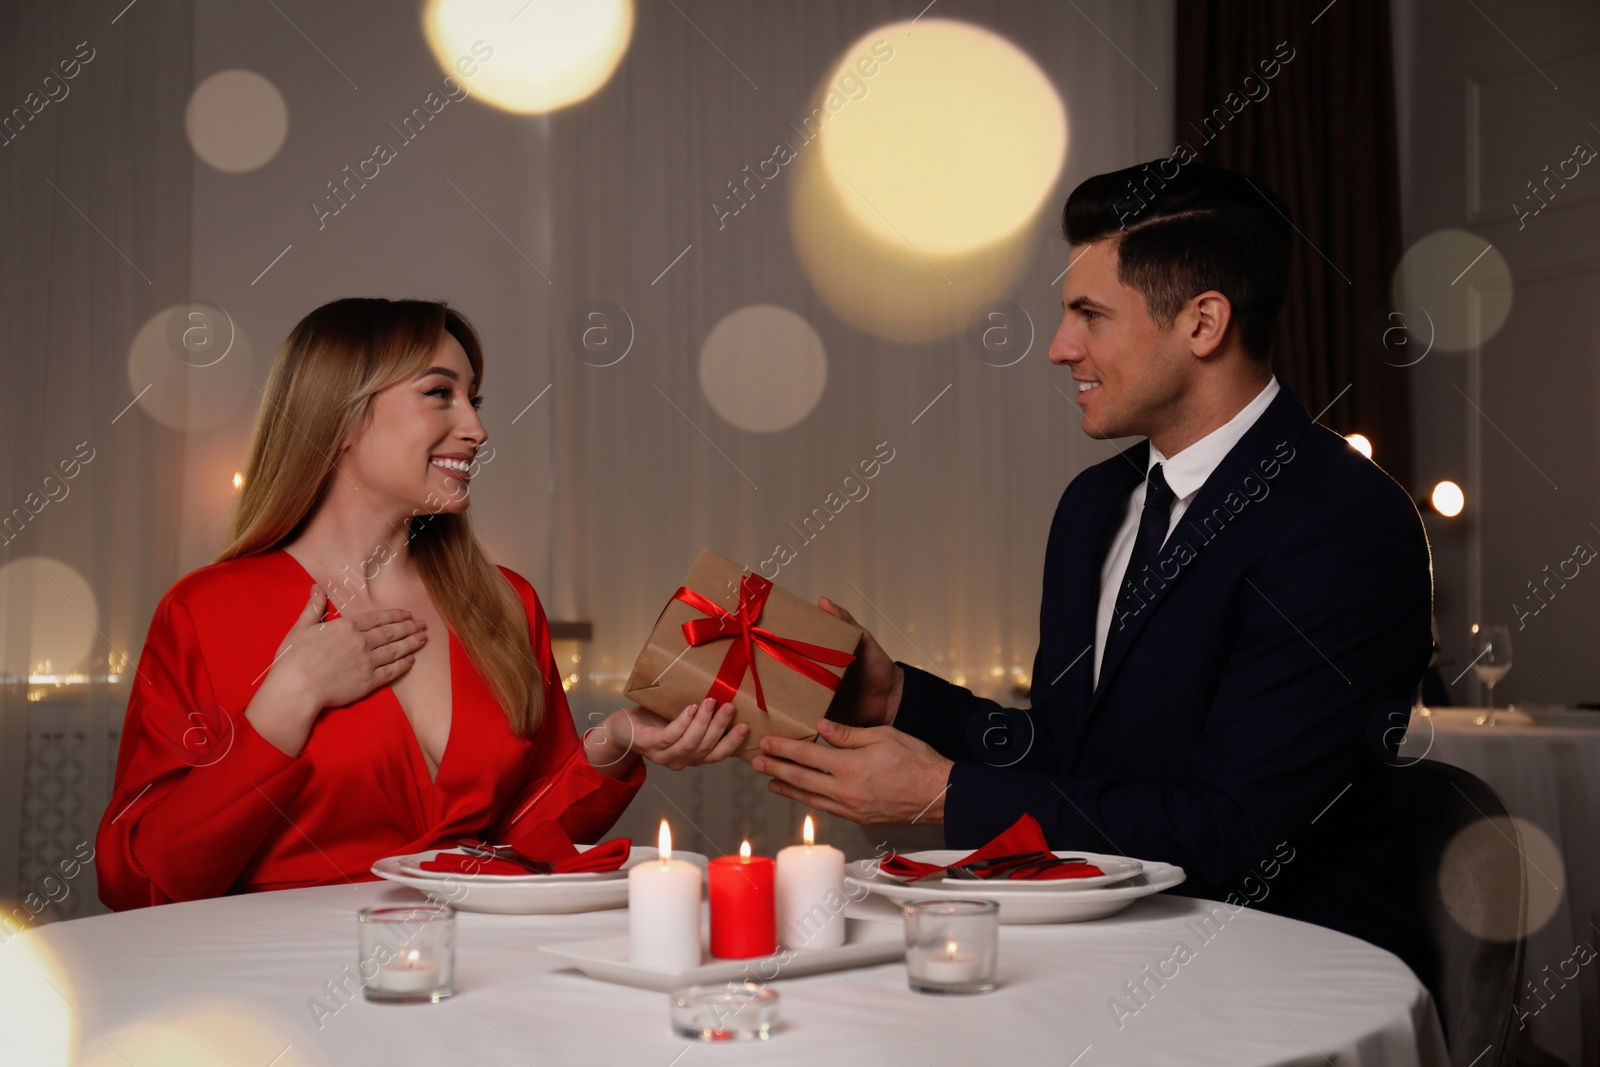 Photo of Man presenting gift to his beloved woman in restaurant at romantic dinner